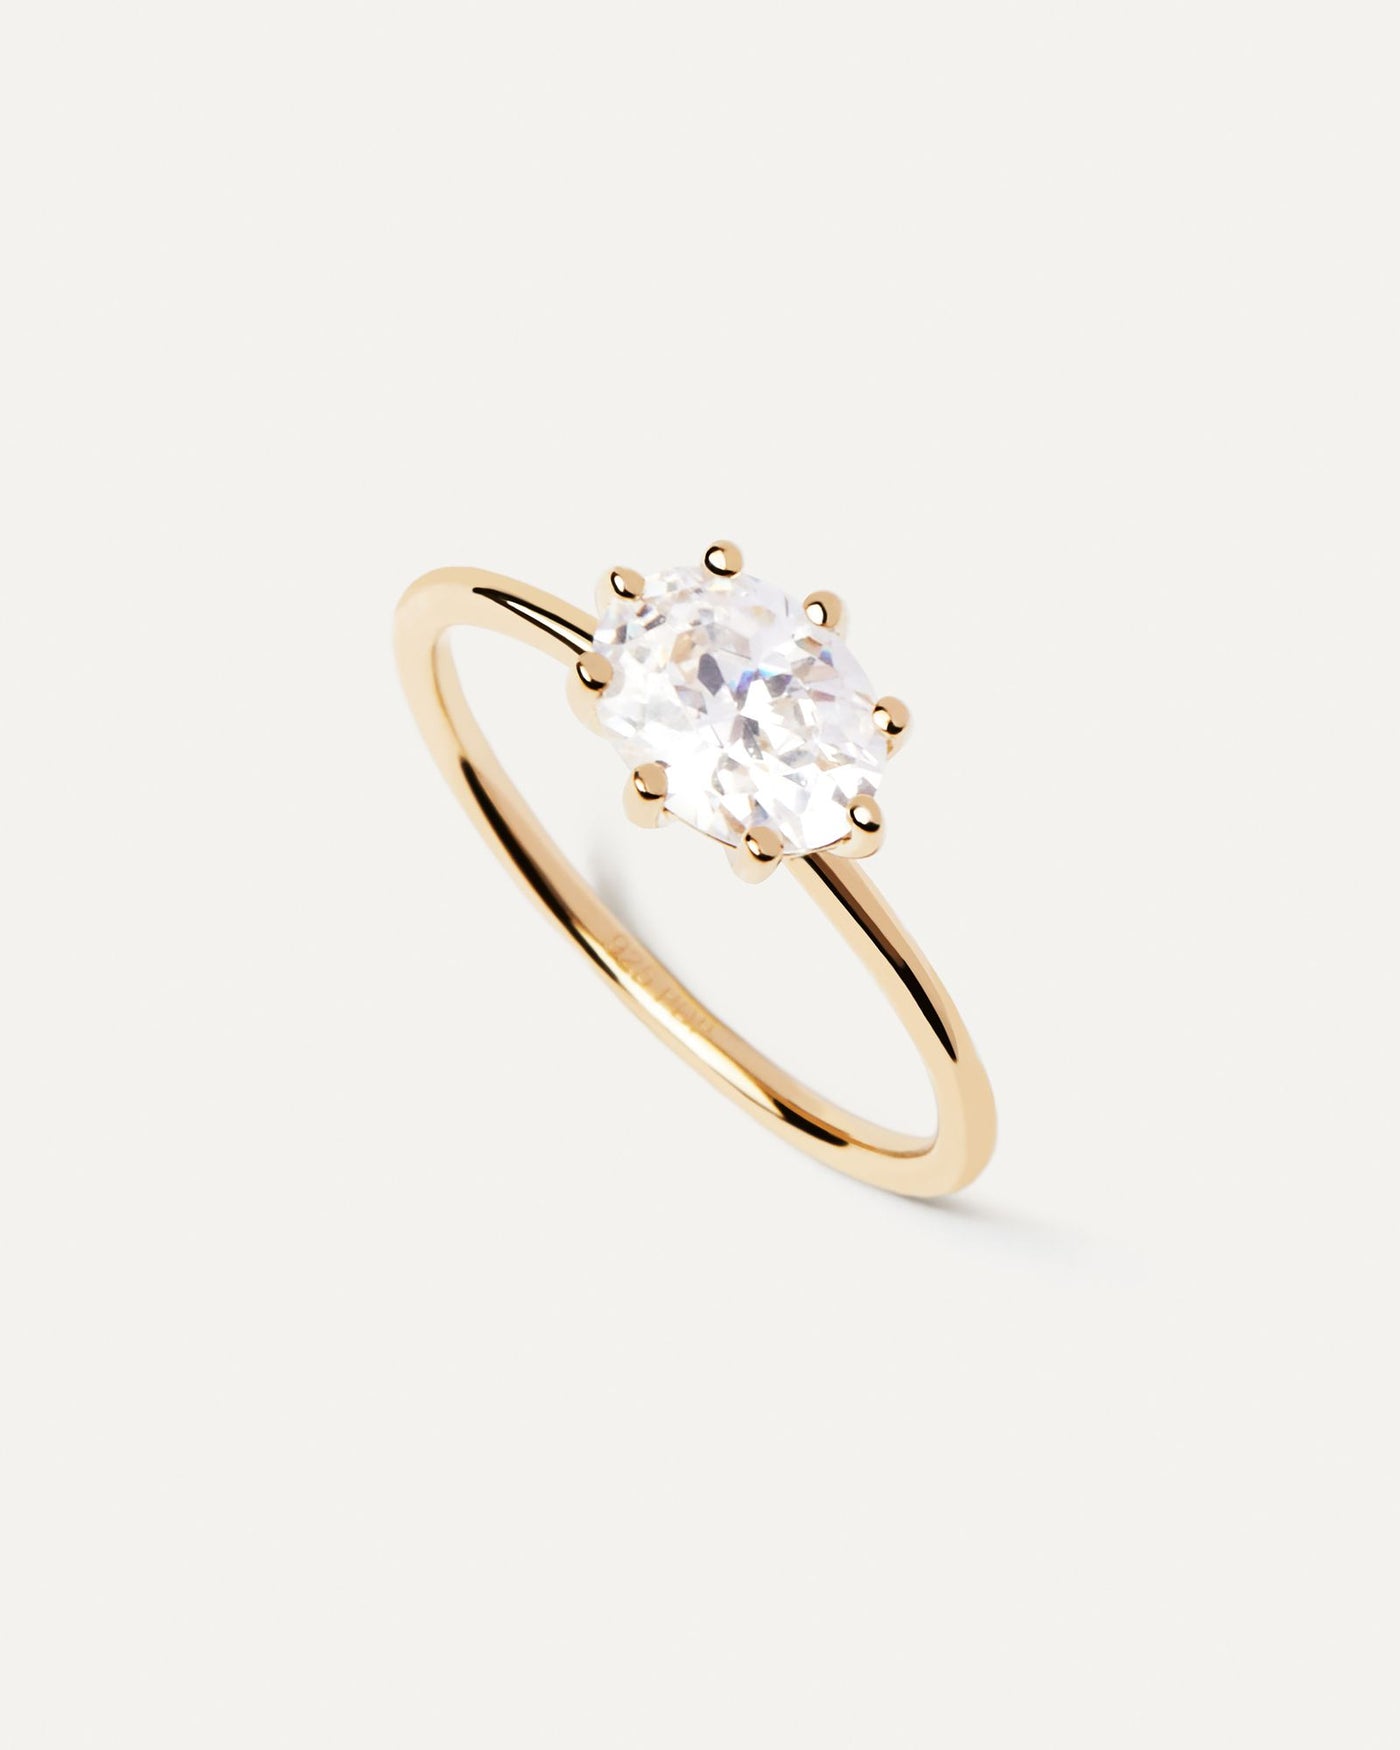 2024 Selection | Kim Ring. Gold-plated eight-prong setting solitary ring with white zirconia. Get the latest arrival from PDPAOLA. Place your order safely and get this Best Seller. Free Shipping.